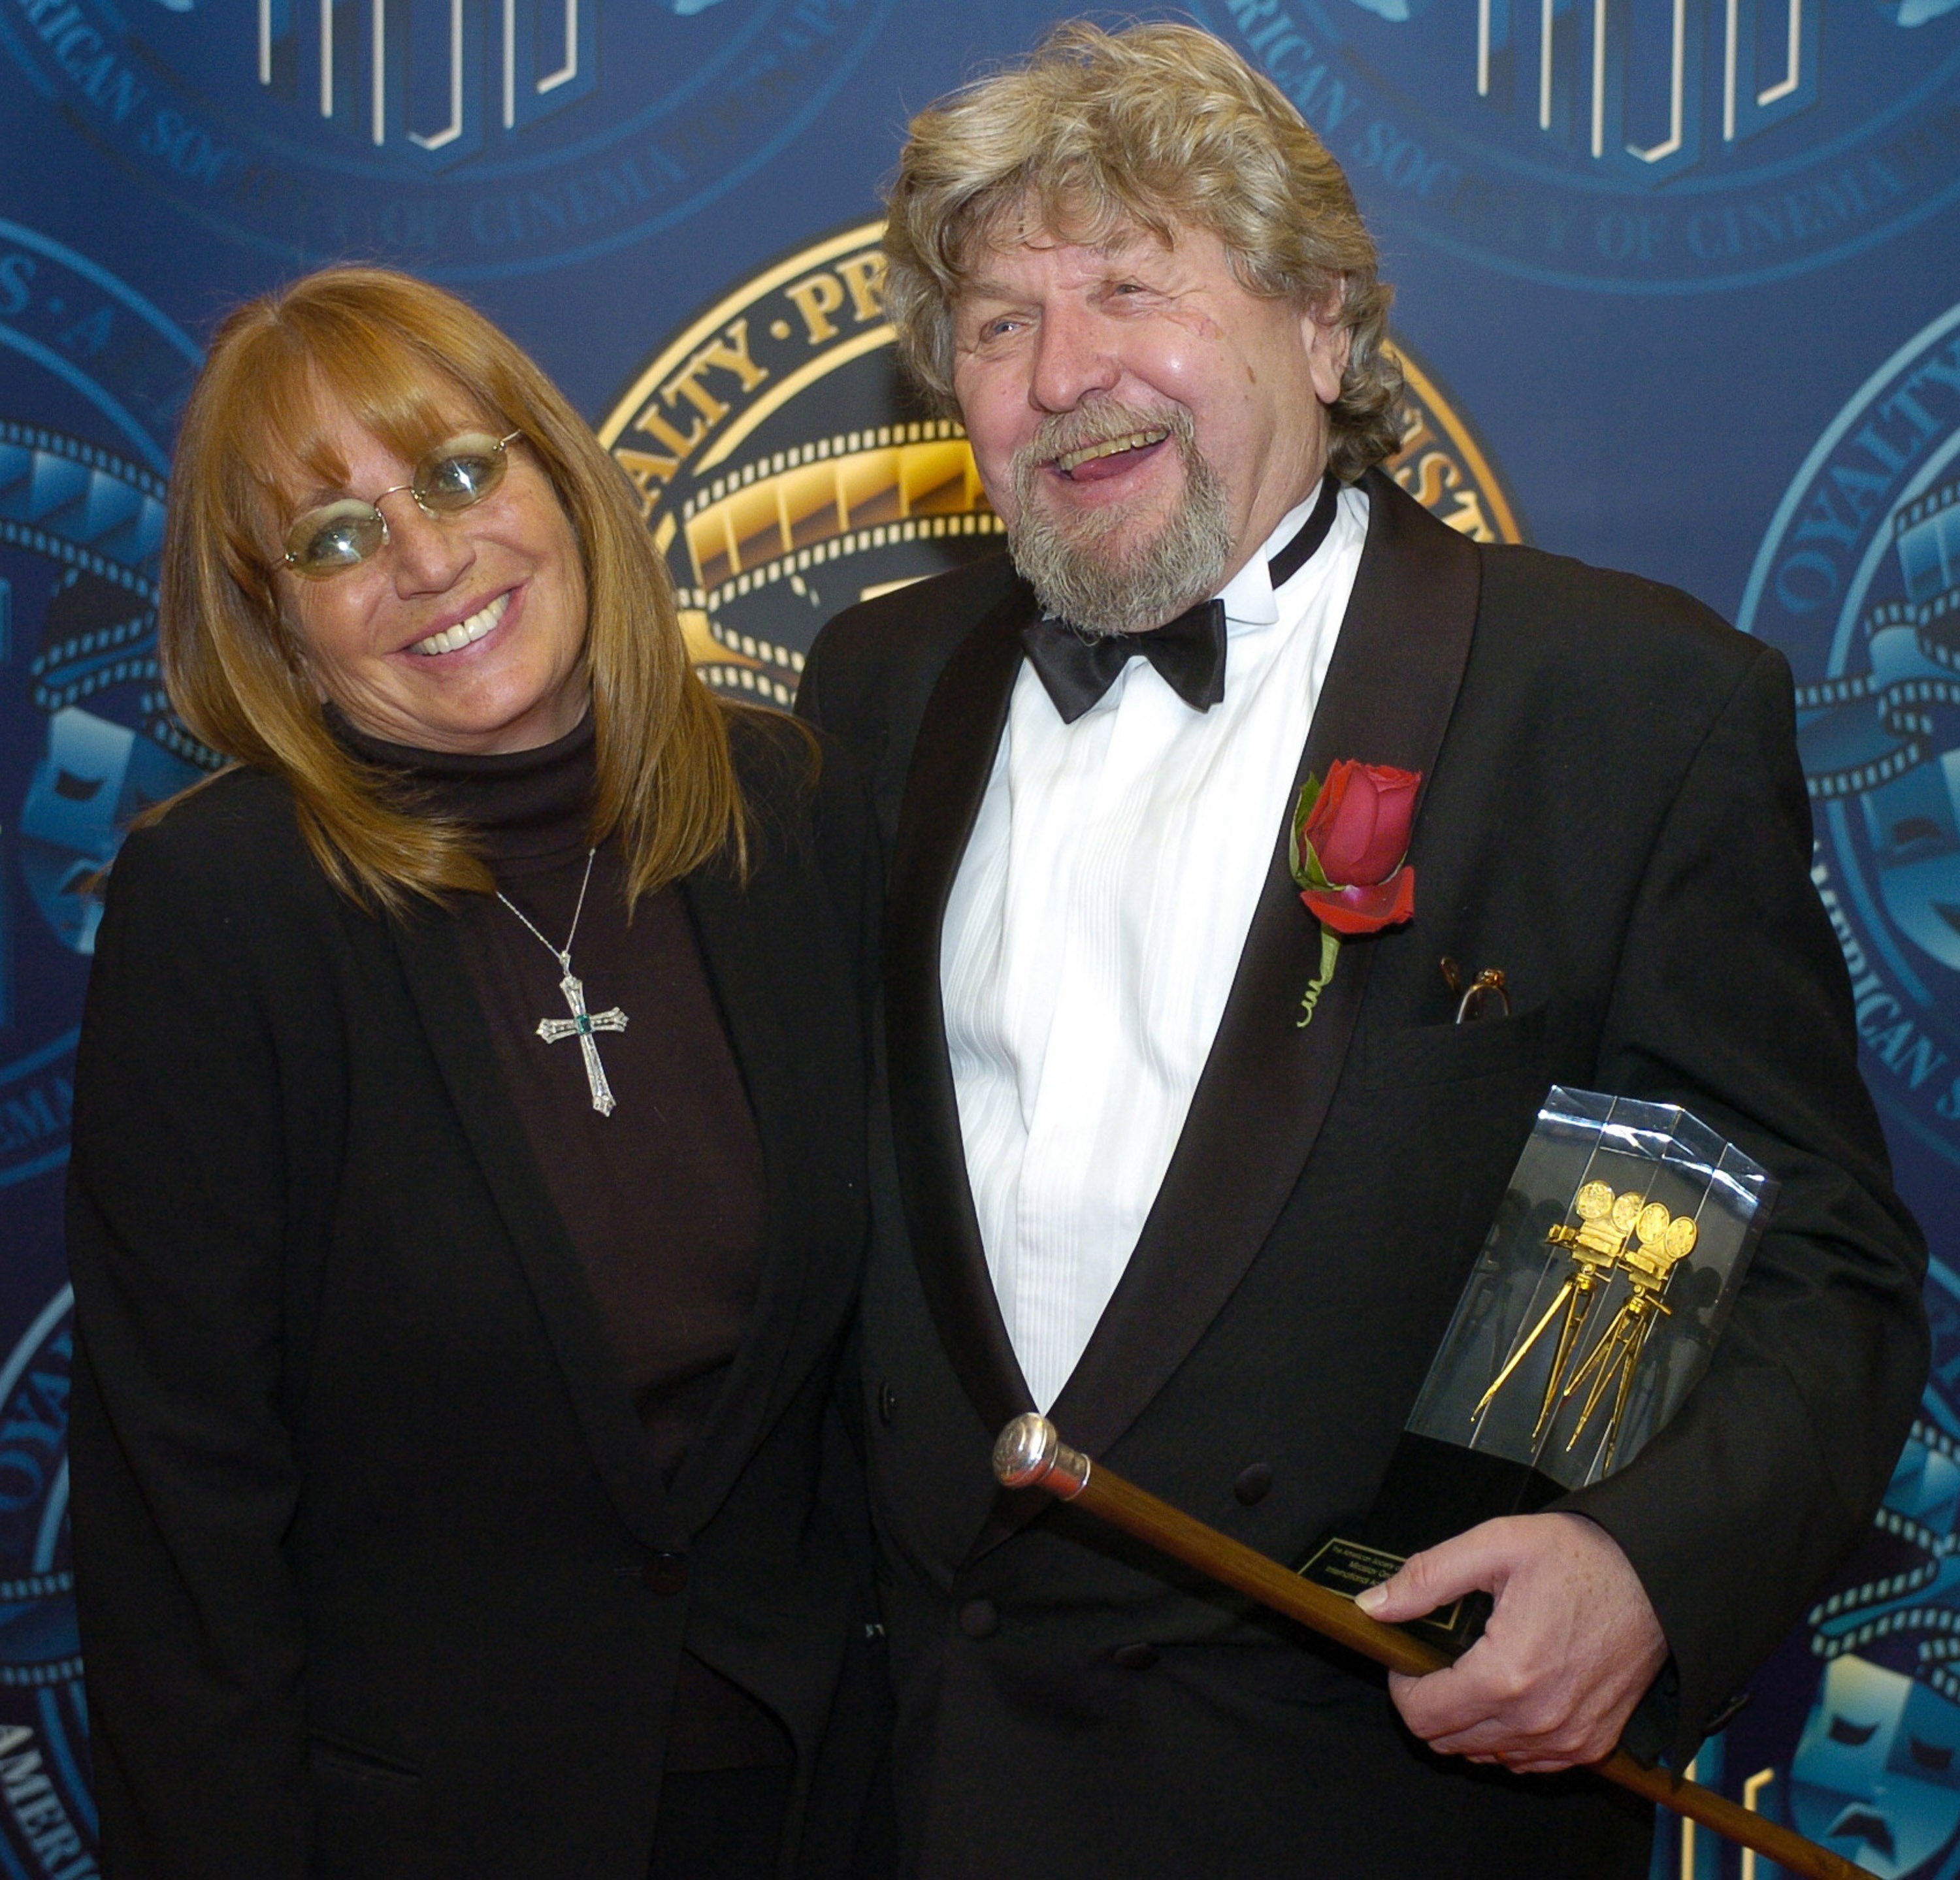 Director Penny Marshall with Ondricek at the ASC Awards in 2004. (Credit: ASC Archives)